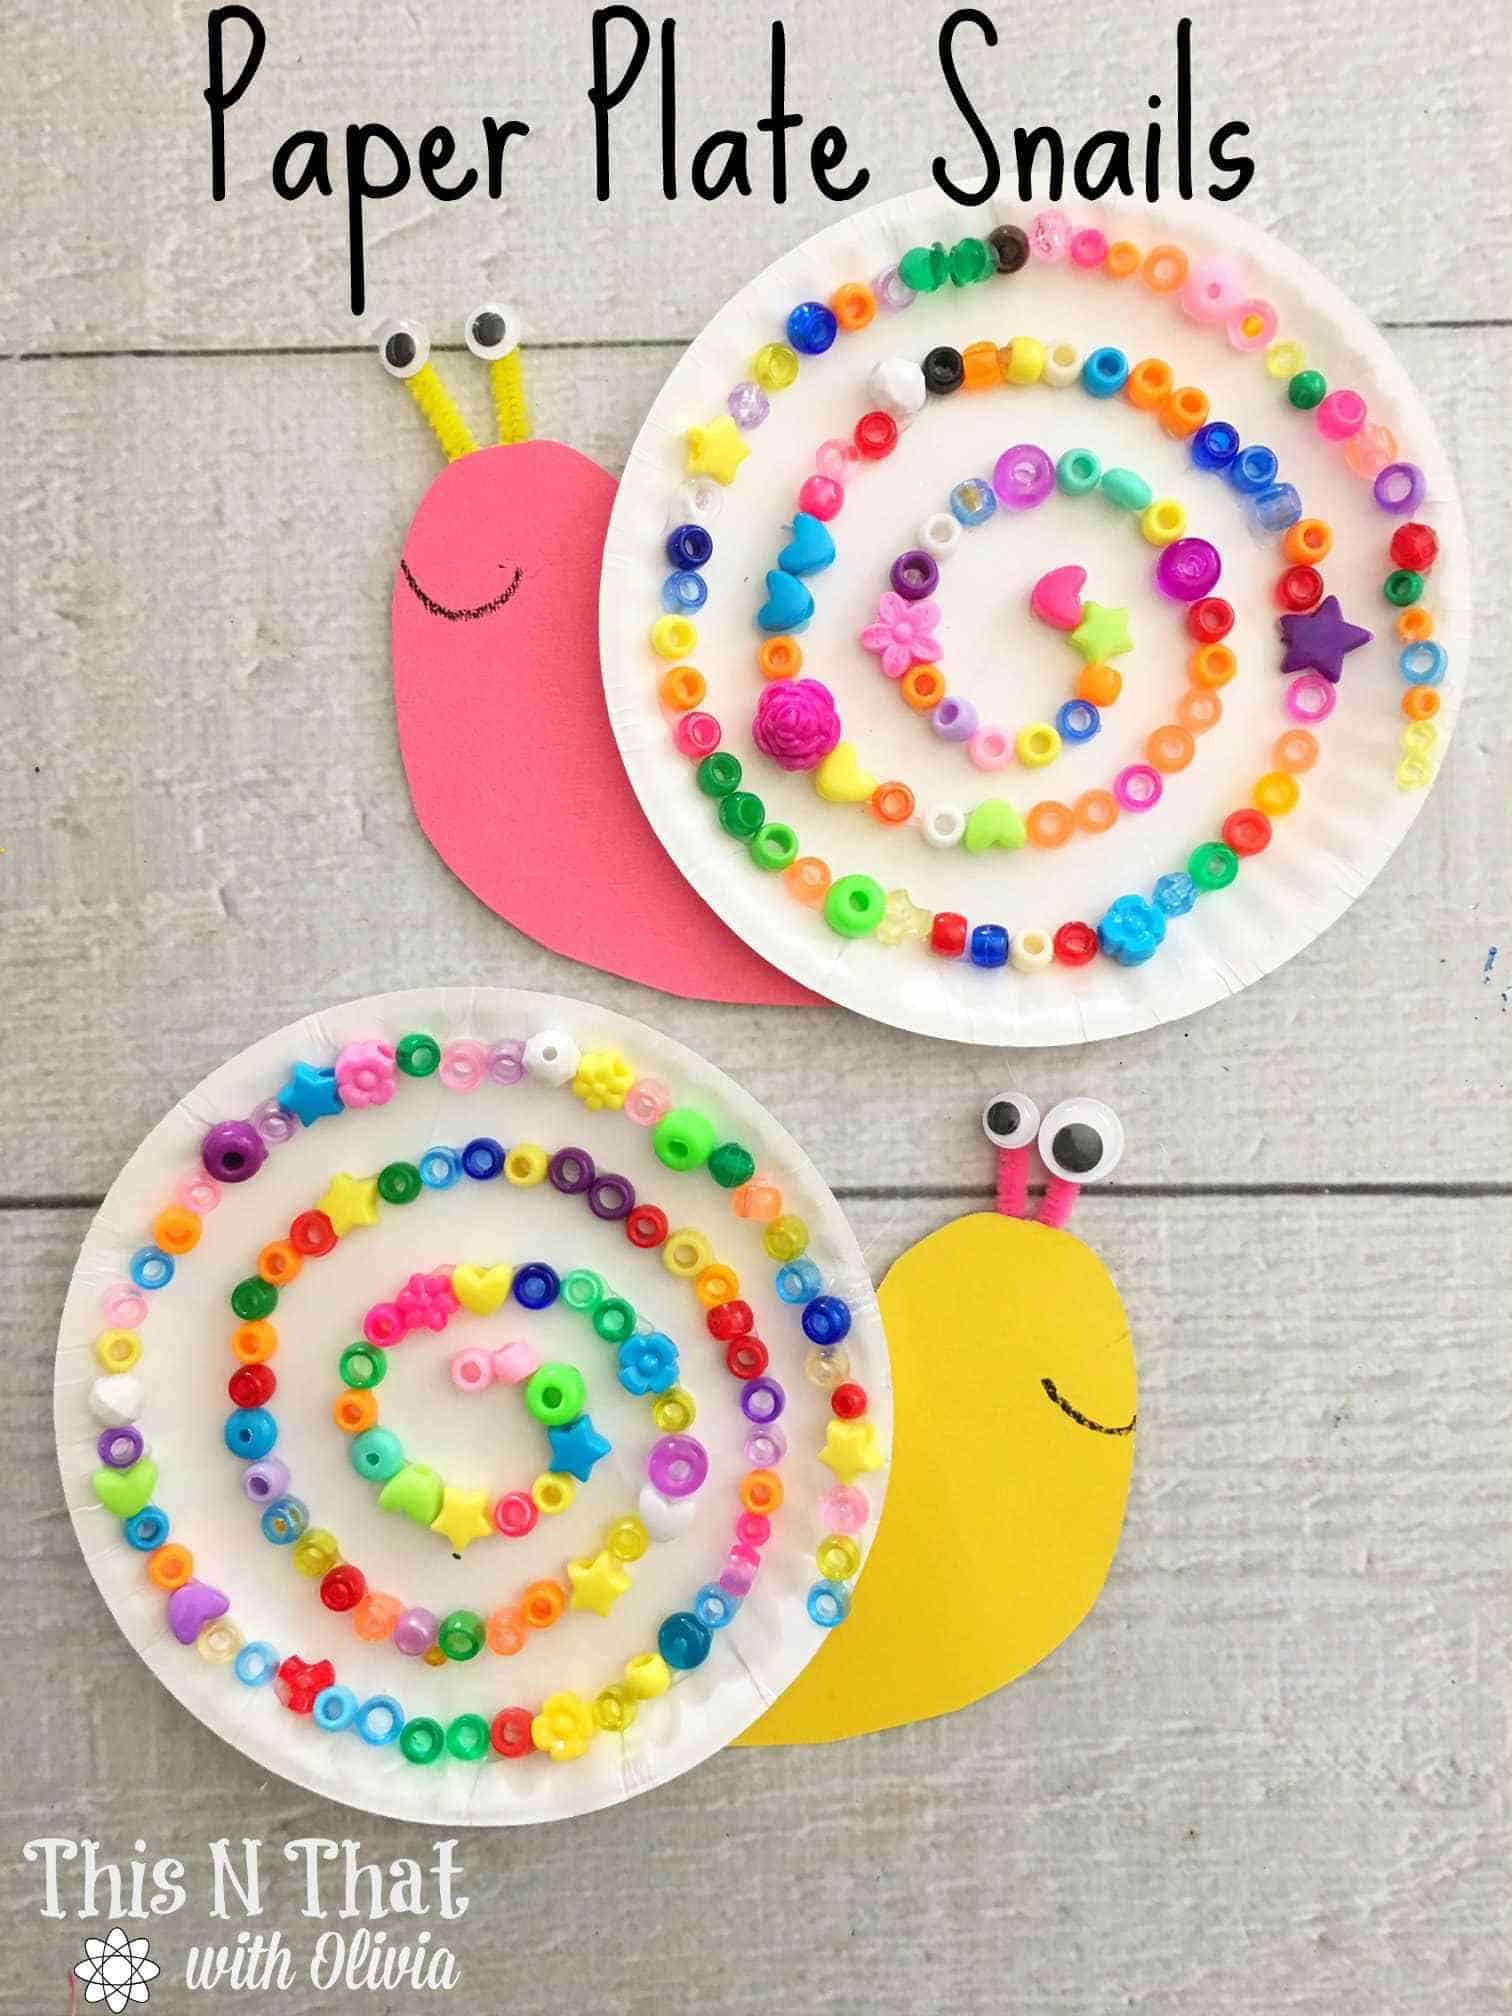 Paper plate and bead snails